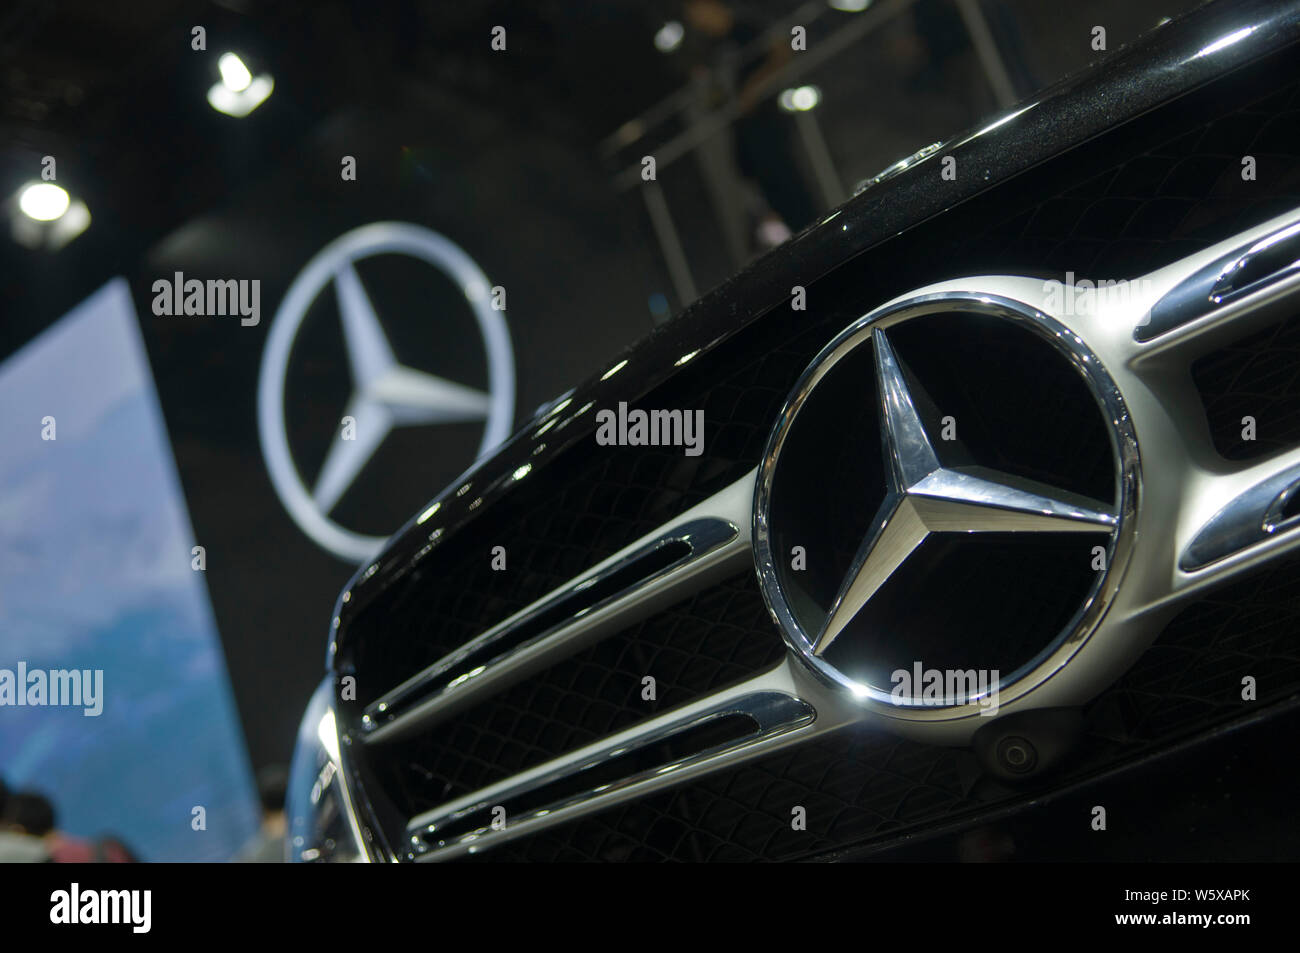 Mercedes benz 320 hi-res stock photography and images - Alamy